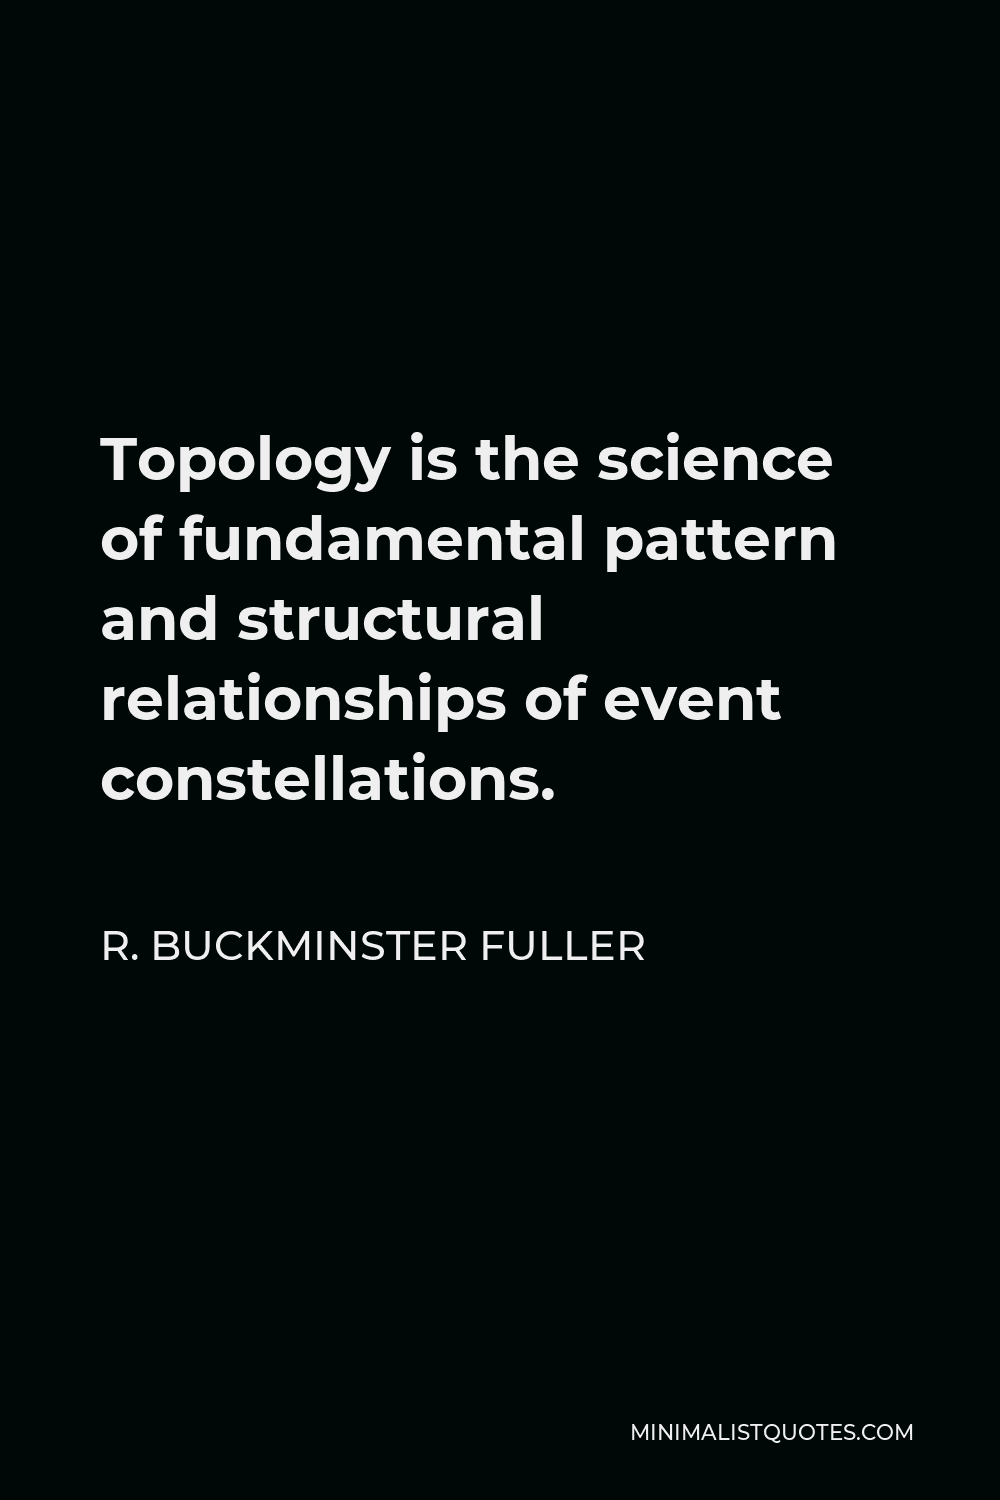 R. Buckminster Fuller Quote - Topology is the science of fundamental pattern and structural relationships of event constellations.